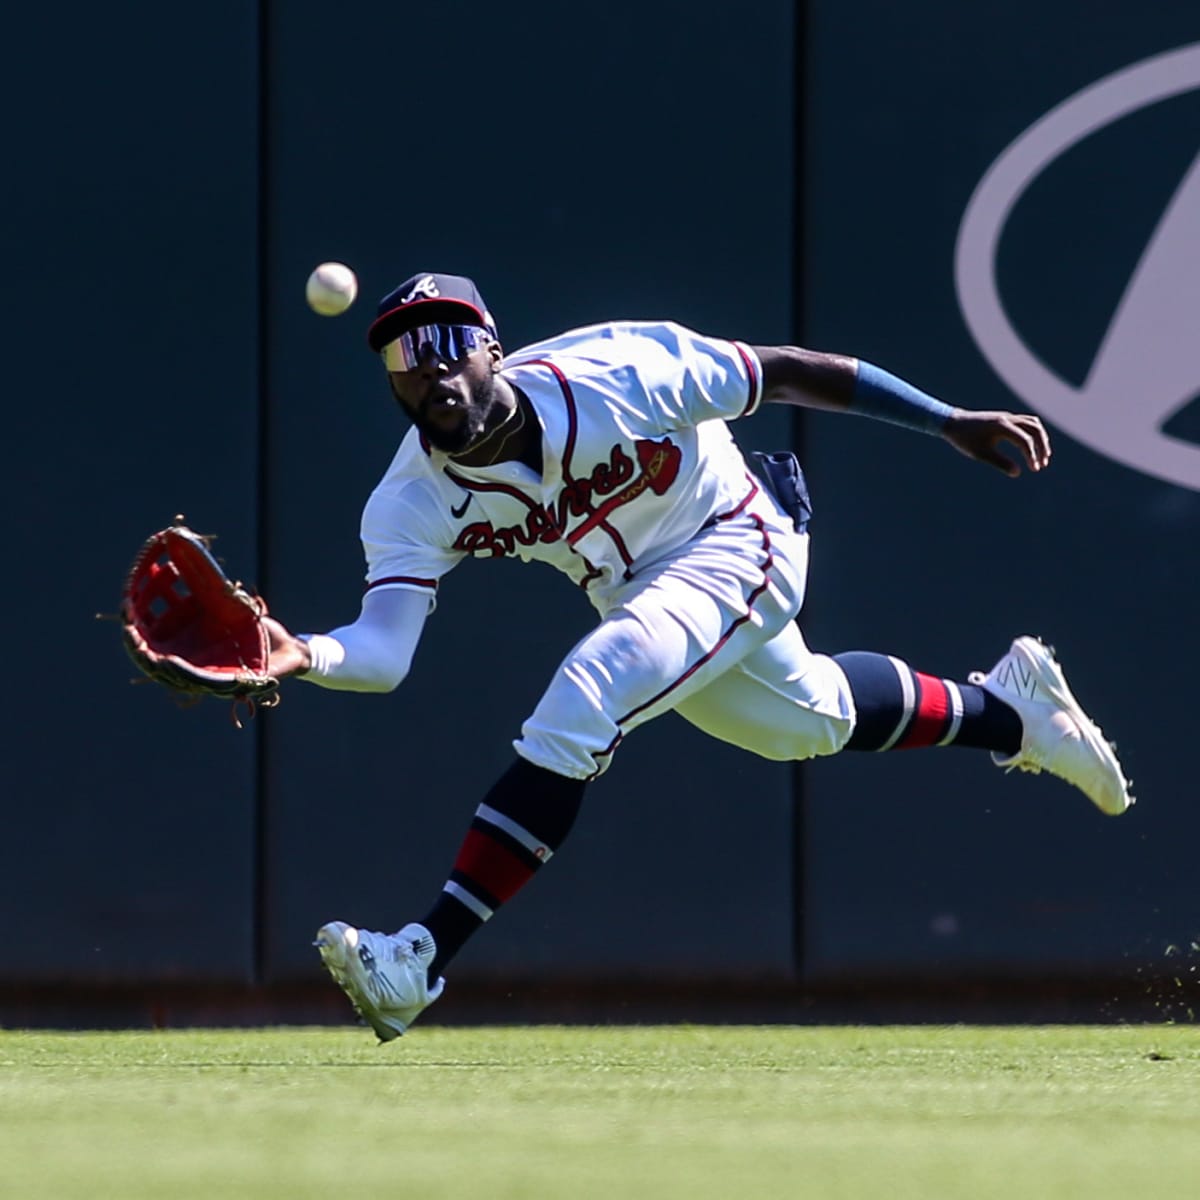 Michael Harris' defensive play helps Braves knot series with Phillies